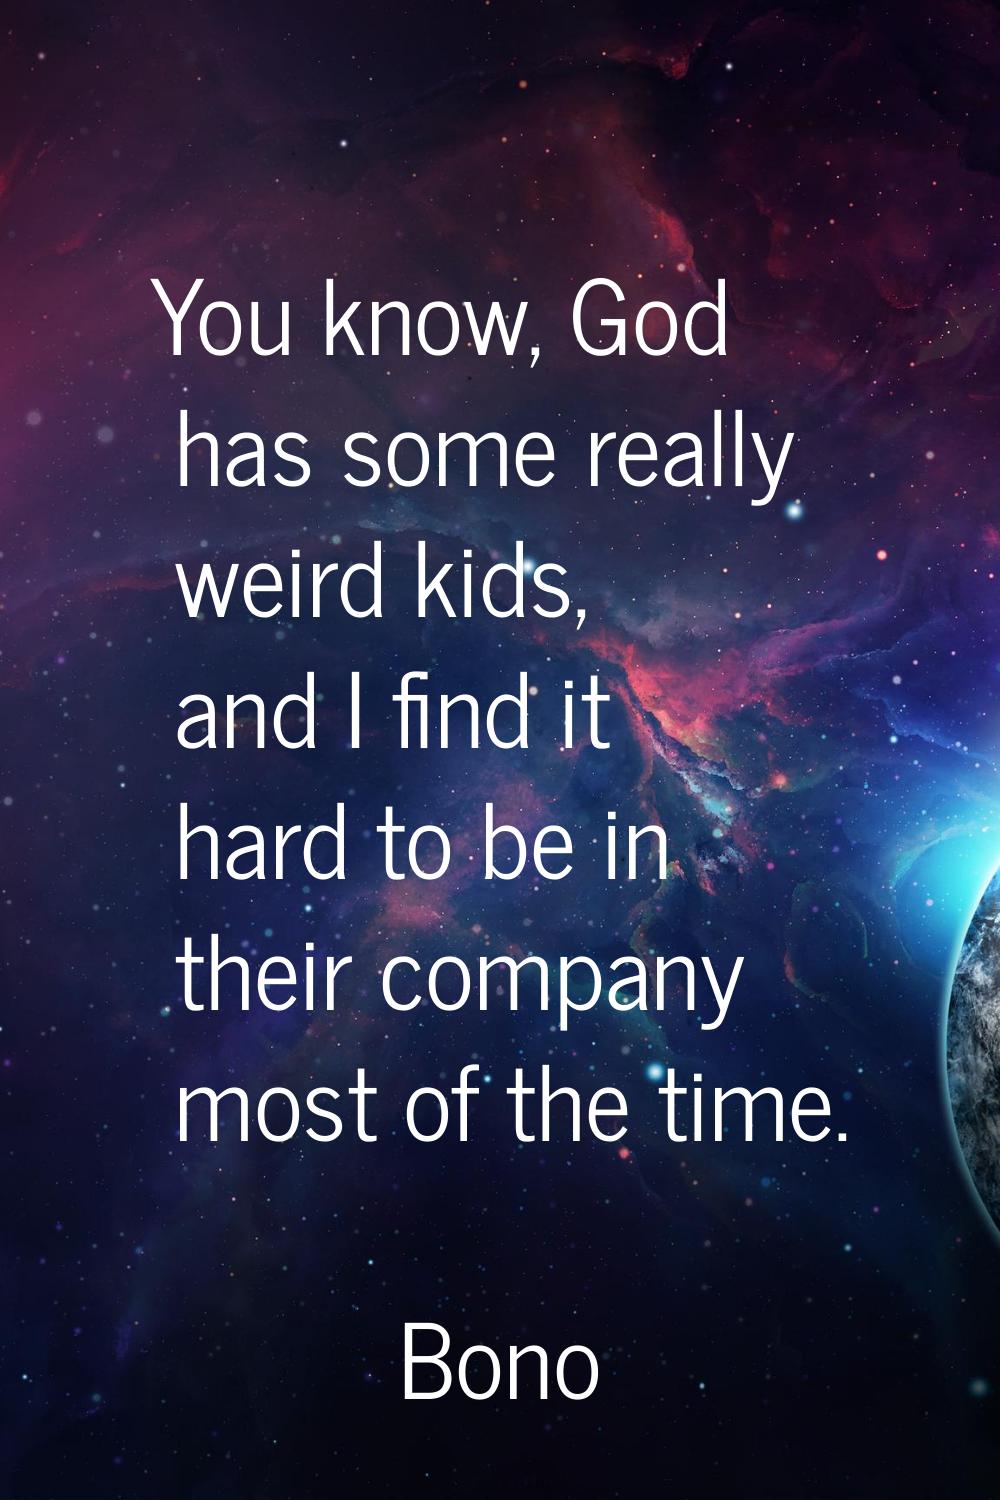 You know, God has some really weird kids, and I find it hard to be in their company most of the tim